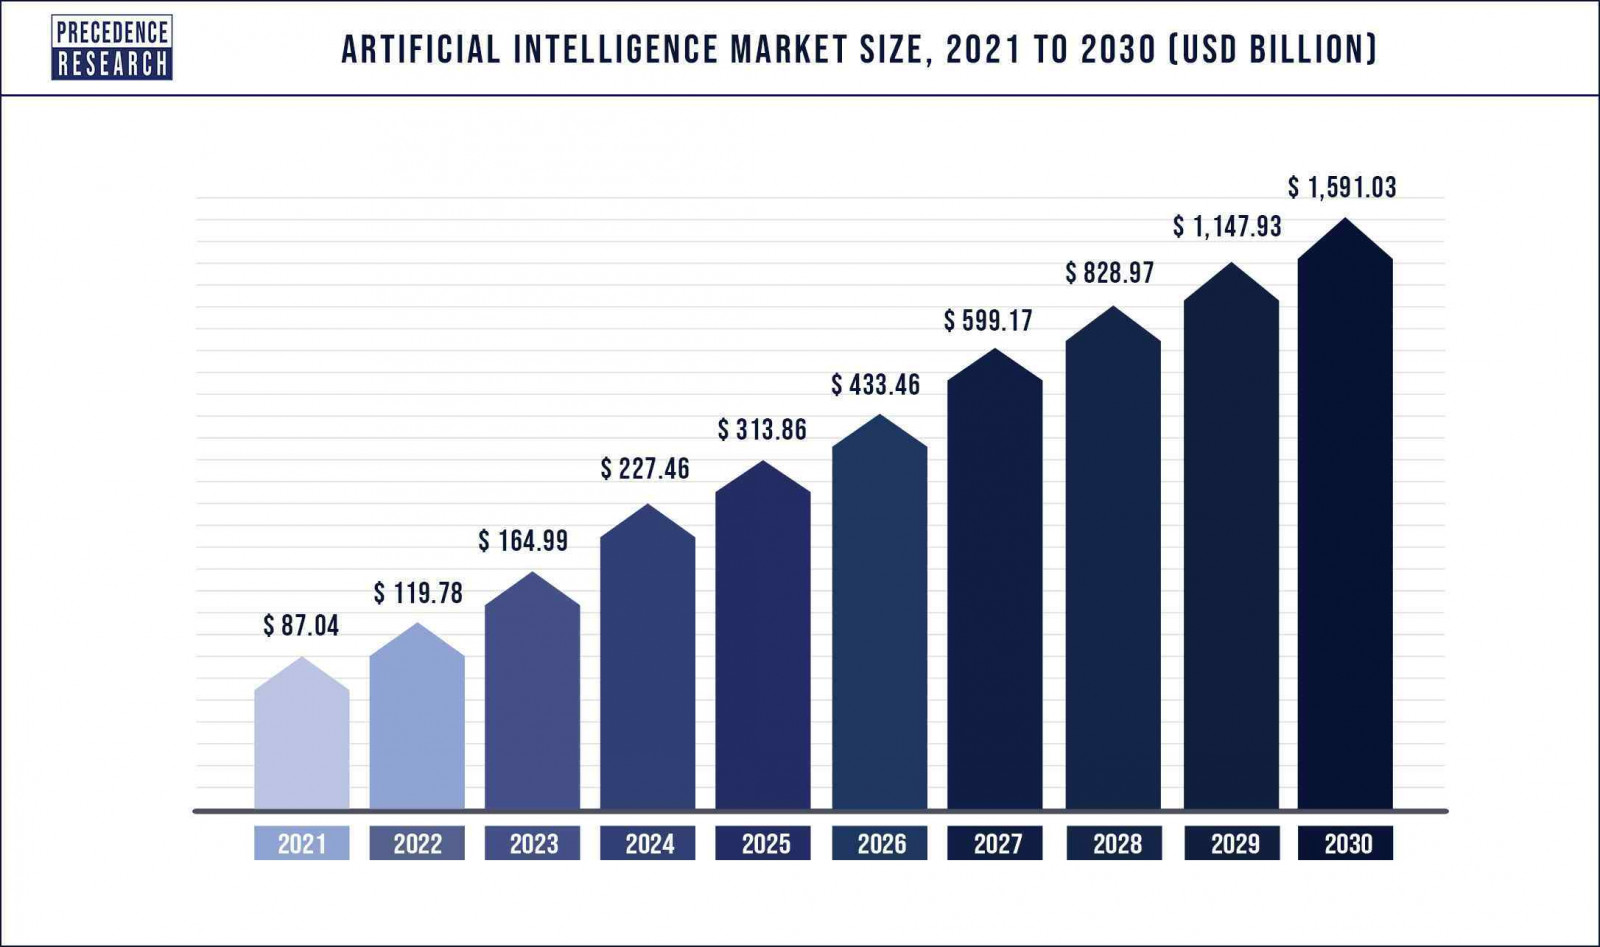 The global artificial intelligence (AI) market size